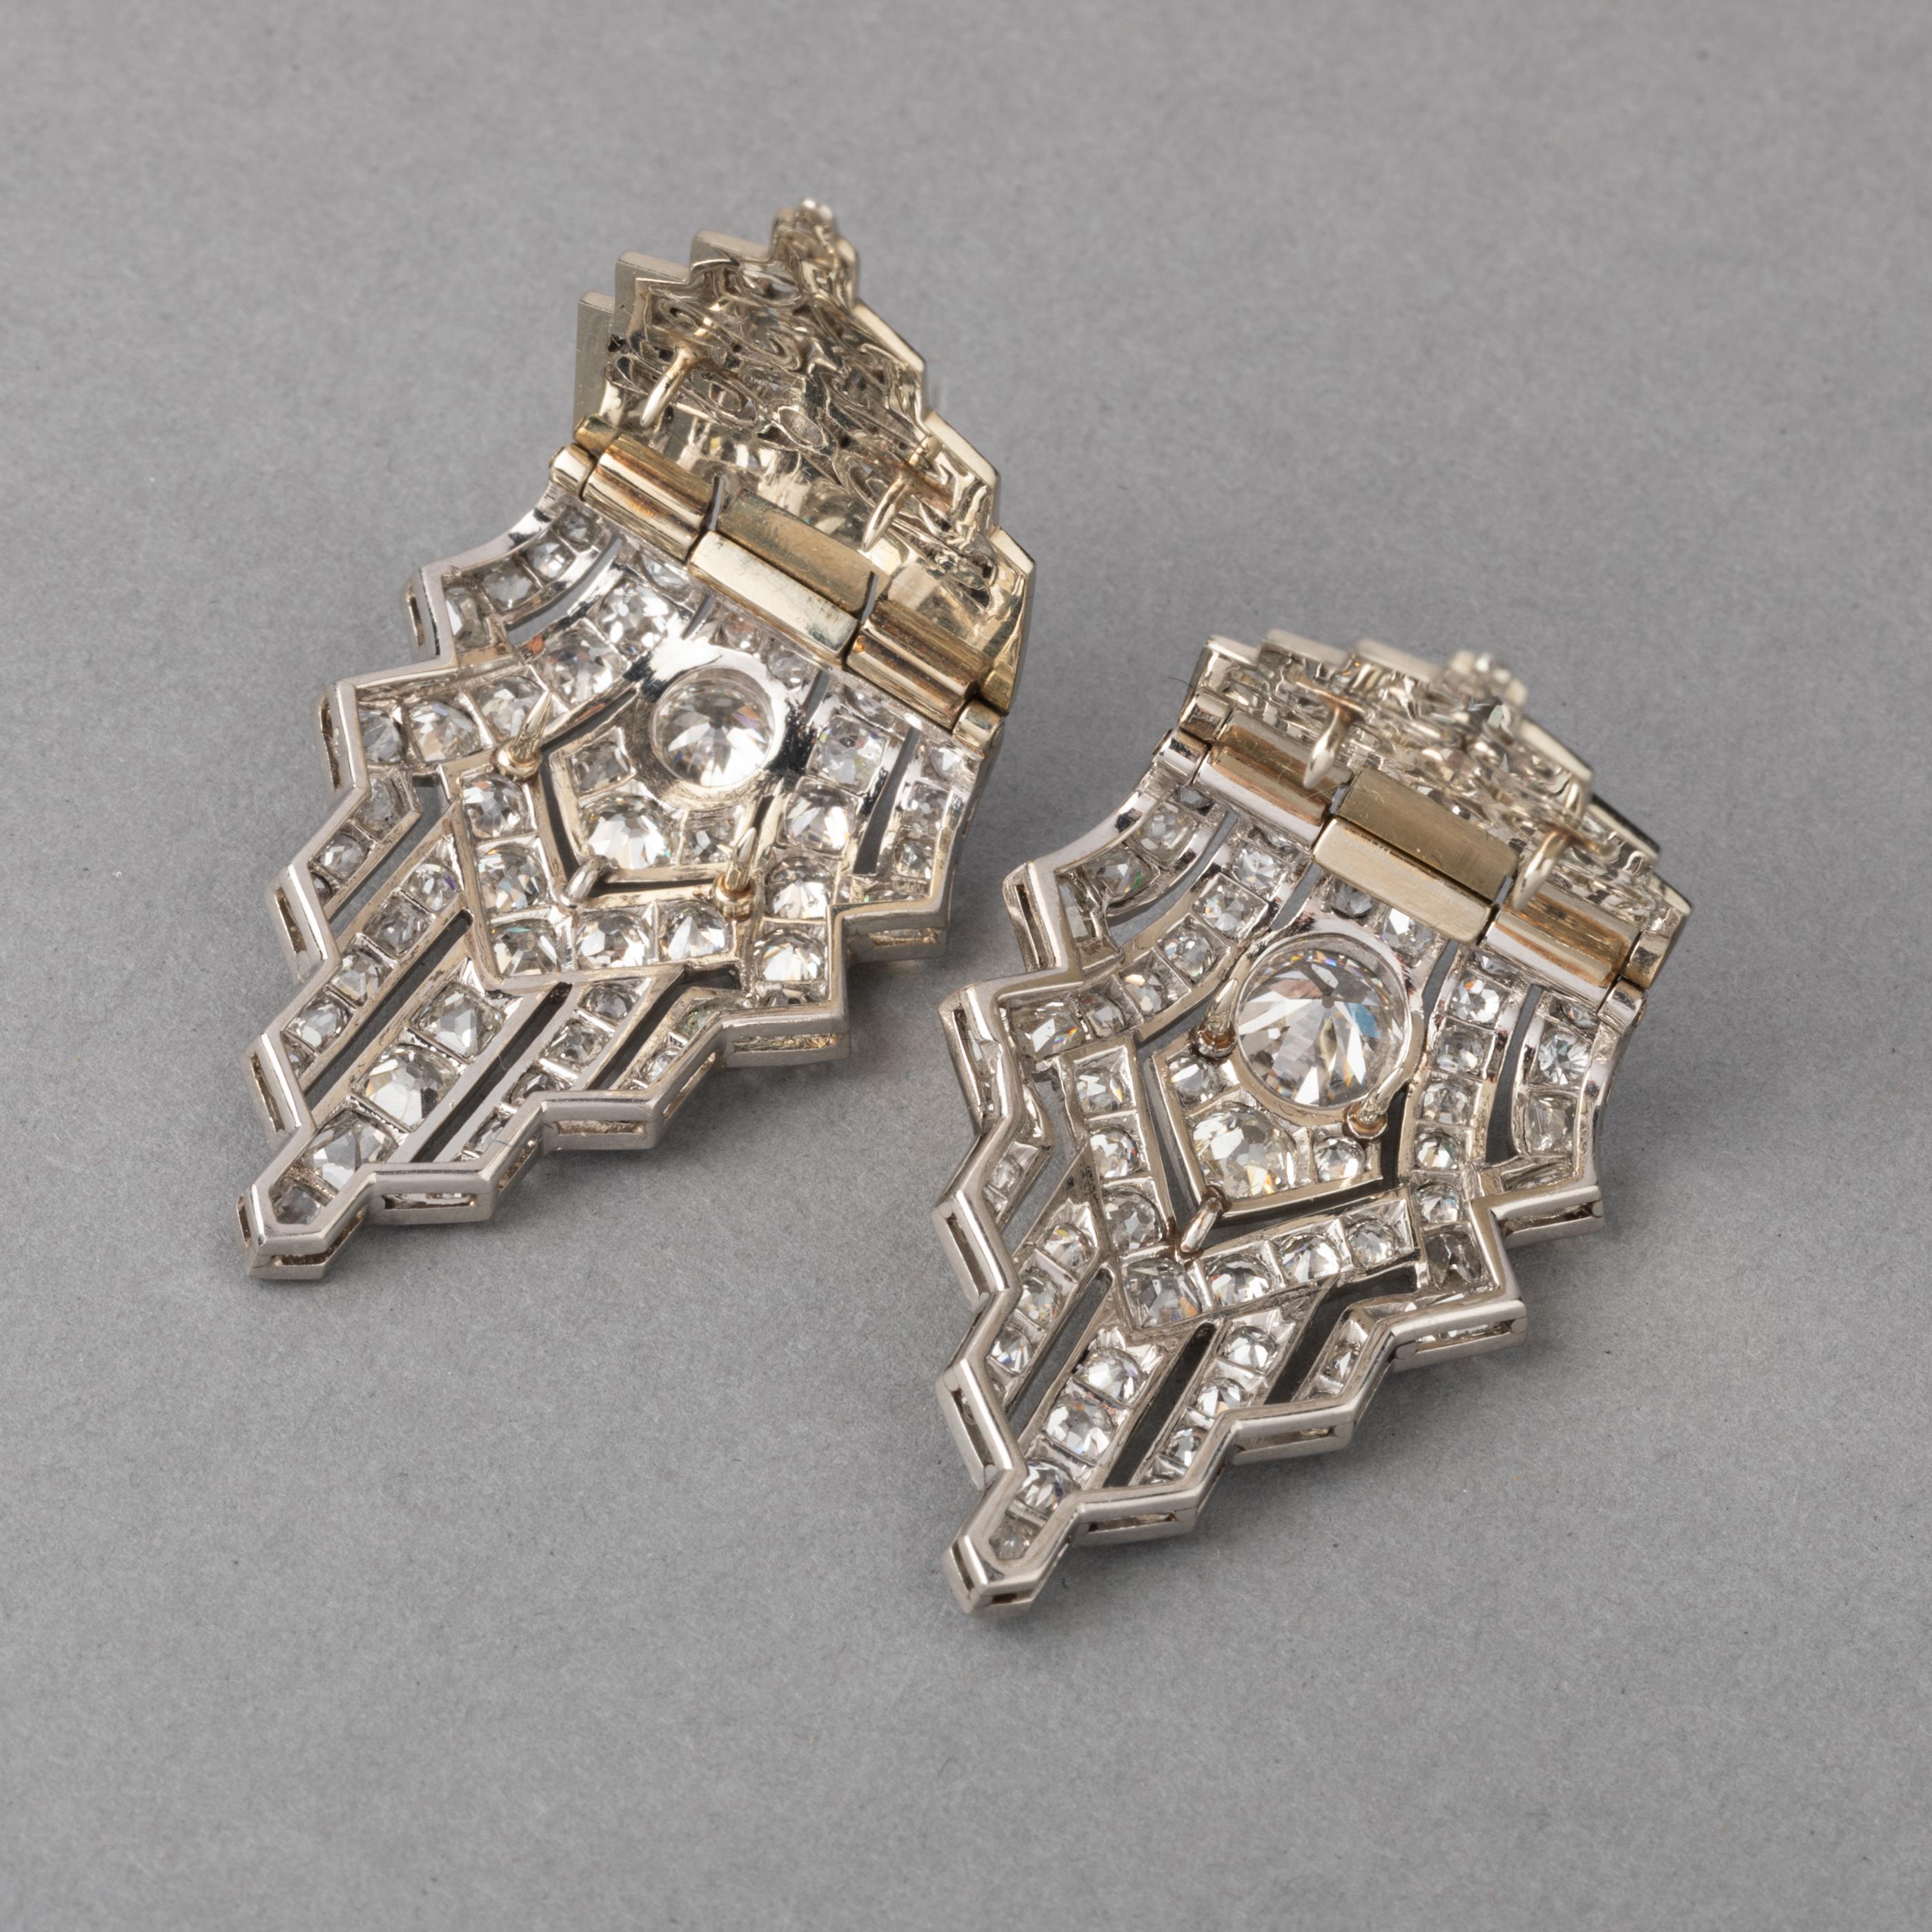 Platinum and 6 Carat Diamonds French Art Deco Clips Brooches 1